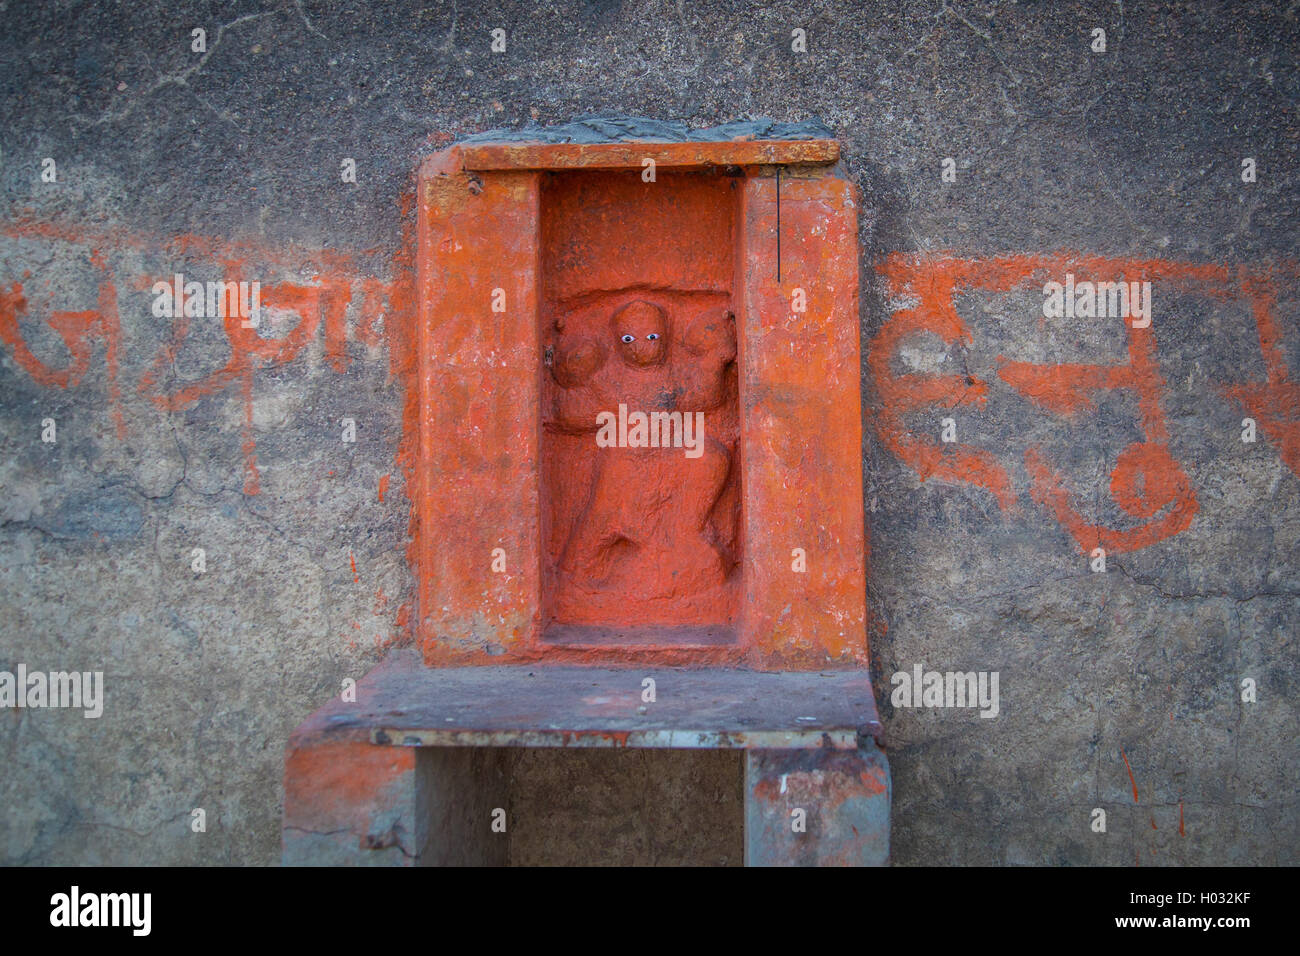 Mini Hindi religious wall sculpture. One of many on India's streets. Stock Photo